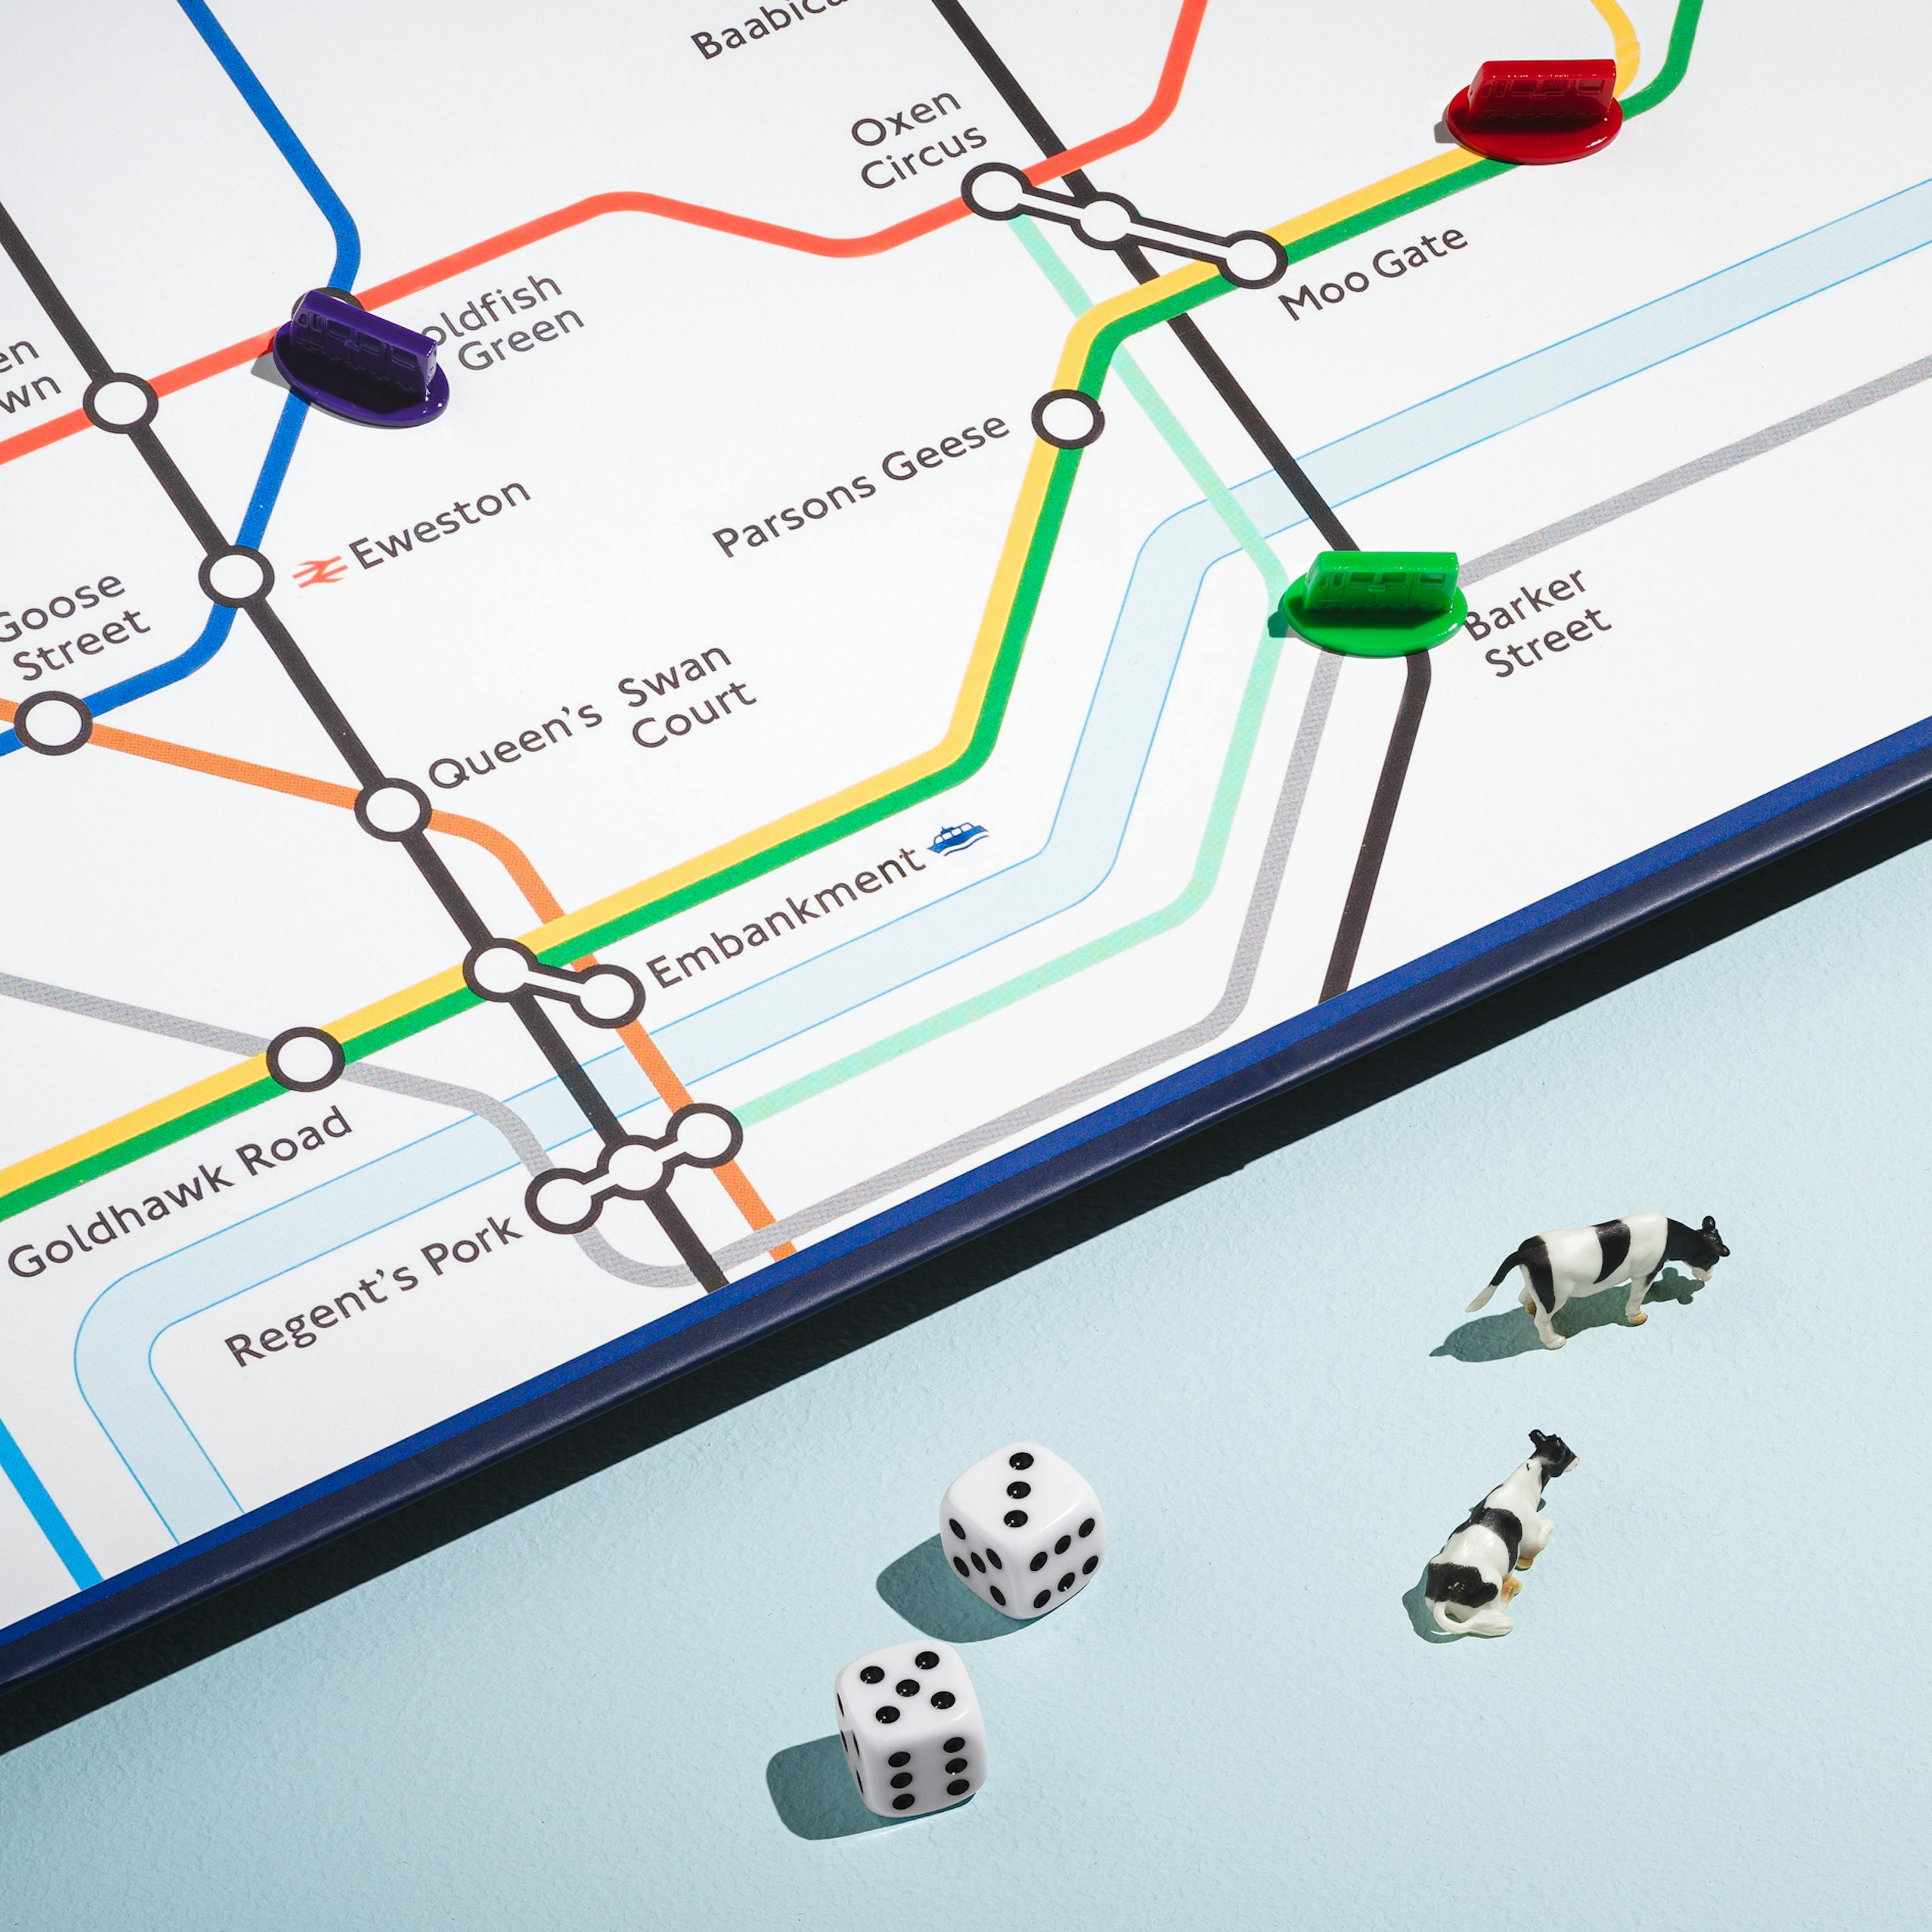 A photograph of a bottom right section of a board game featuring a city underground map with animal place names such as Moo Gate, Ham Heath and Oxen Circus is visible in the top left of the frame. In the bottom section are two die with the numbers five and three, 5 toy cows and a toy London Underground Carriage.